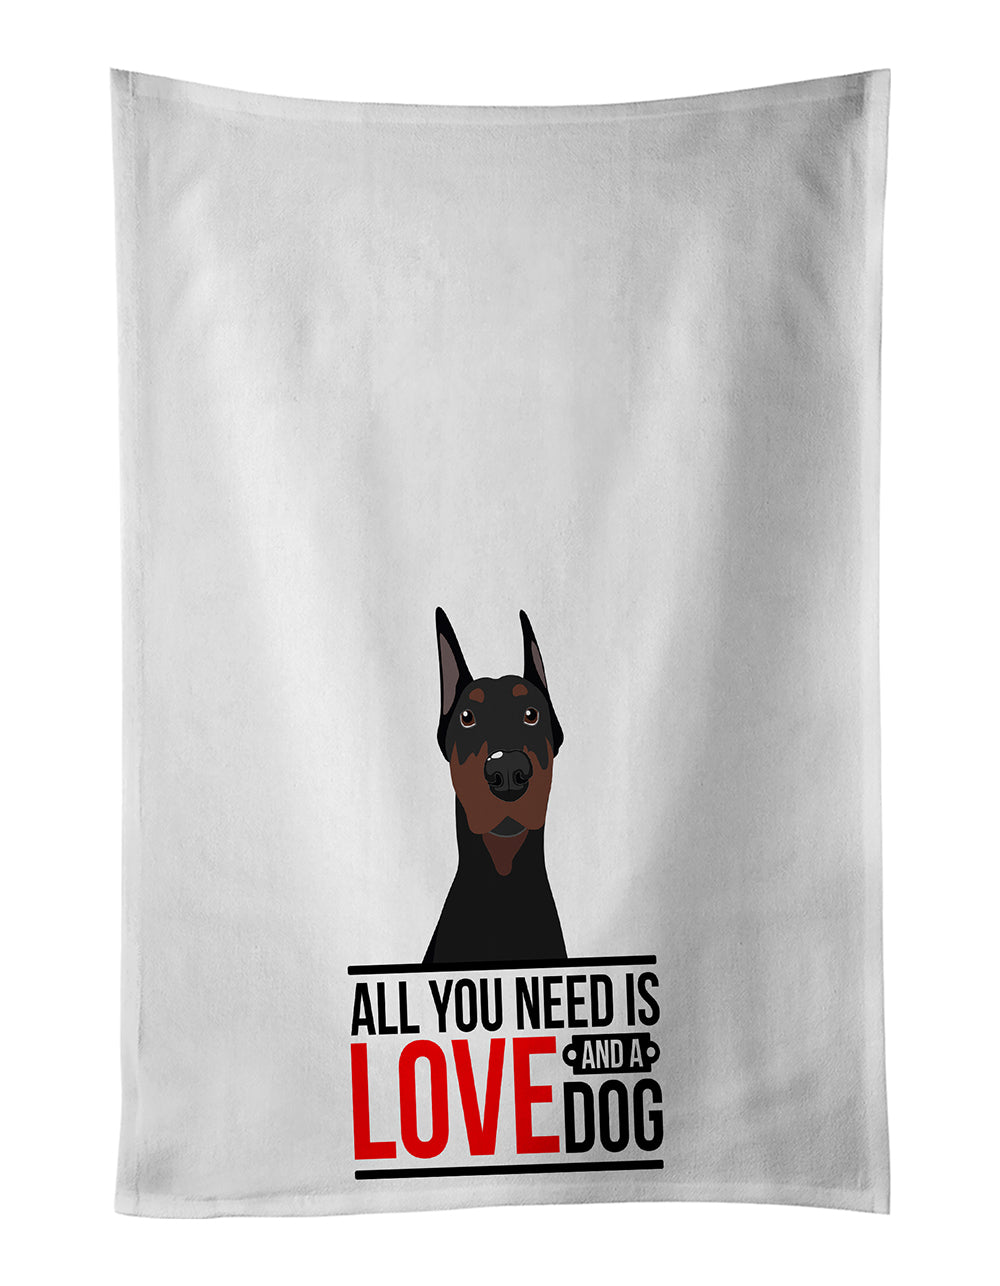 Buy this Doberman Pinscher Black Cropped Ears  White Kitchen Towel Set of 2